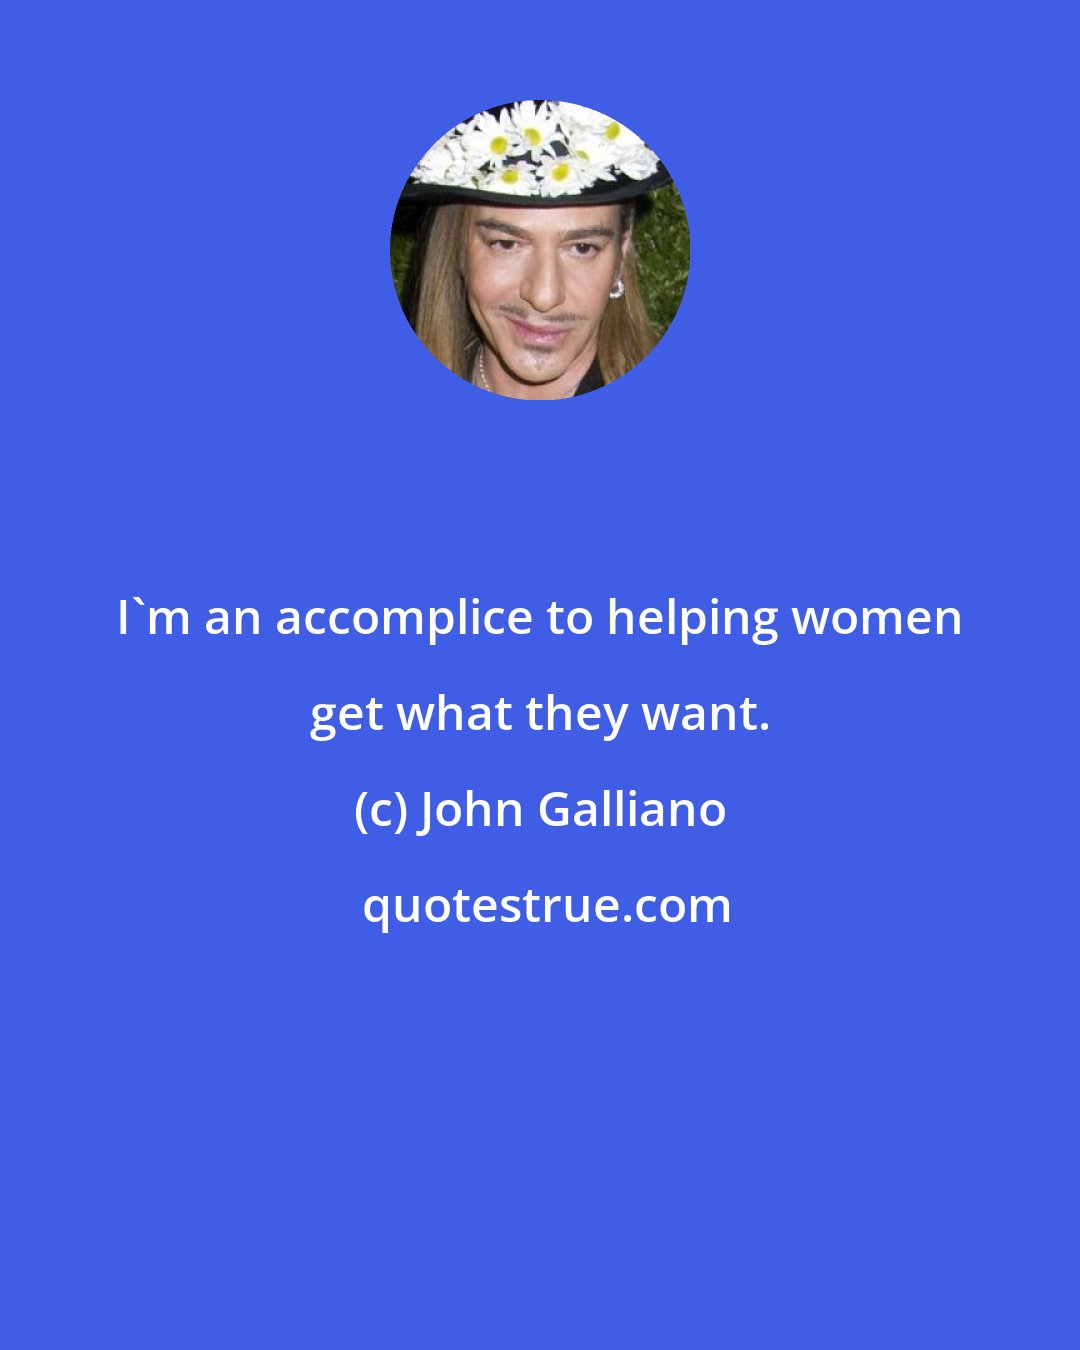 John Galliano: I'm an accomplice to helping women get what they want.